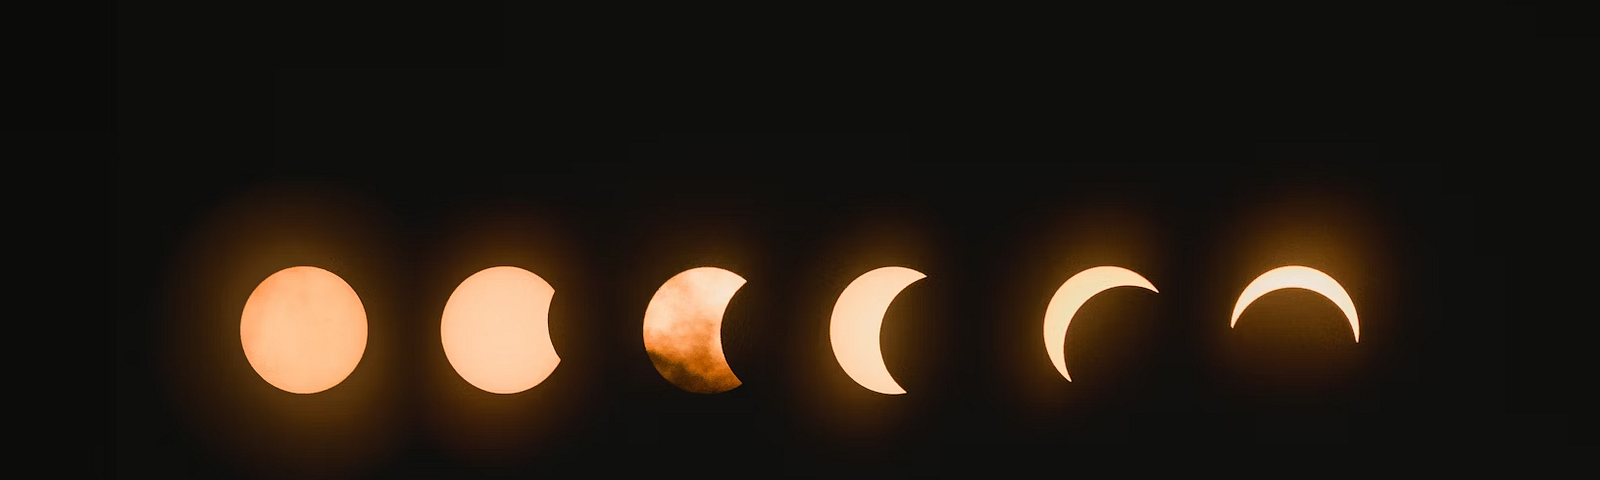 A picture of the different moon phases in a row